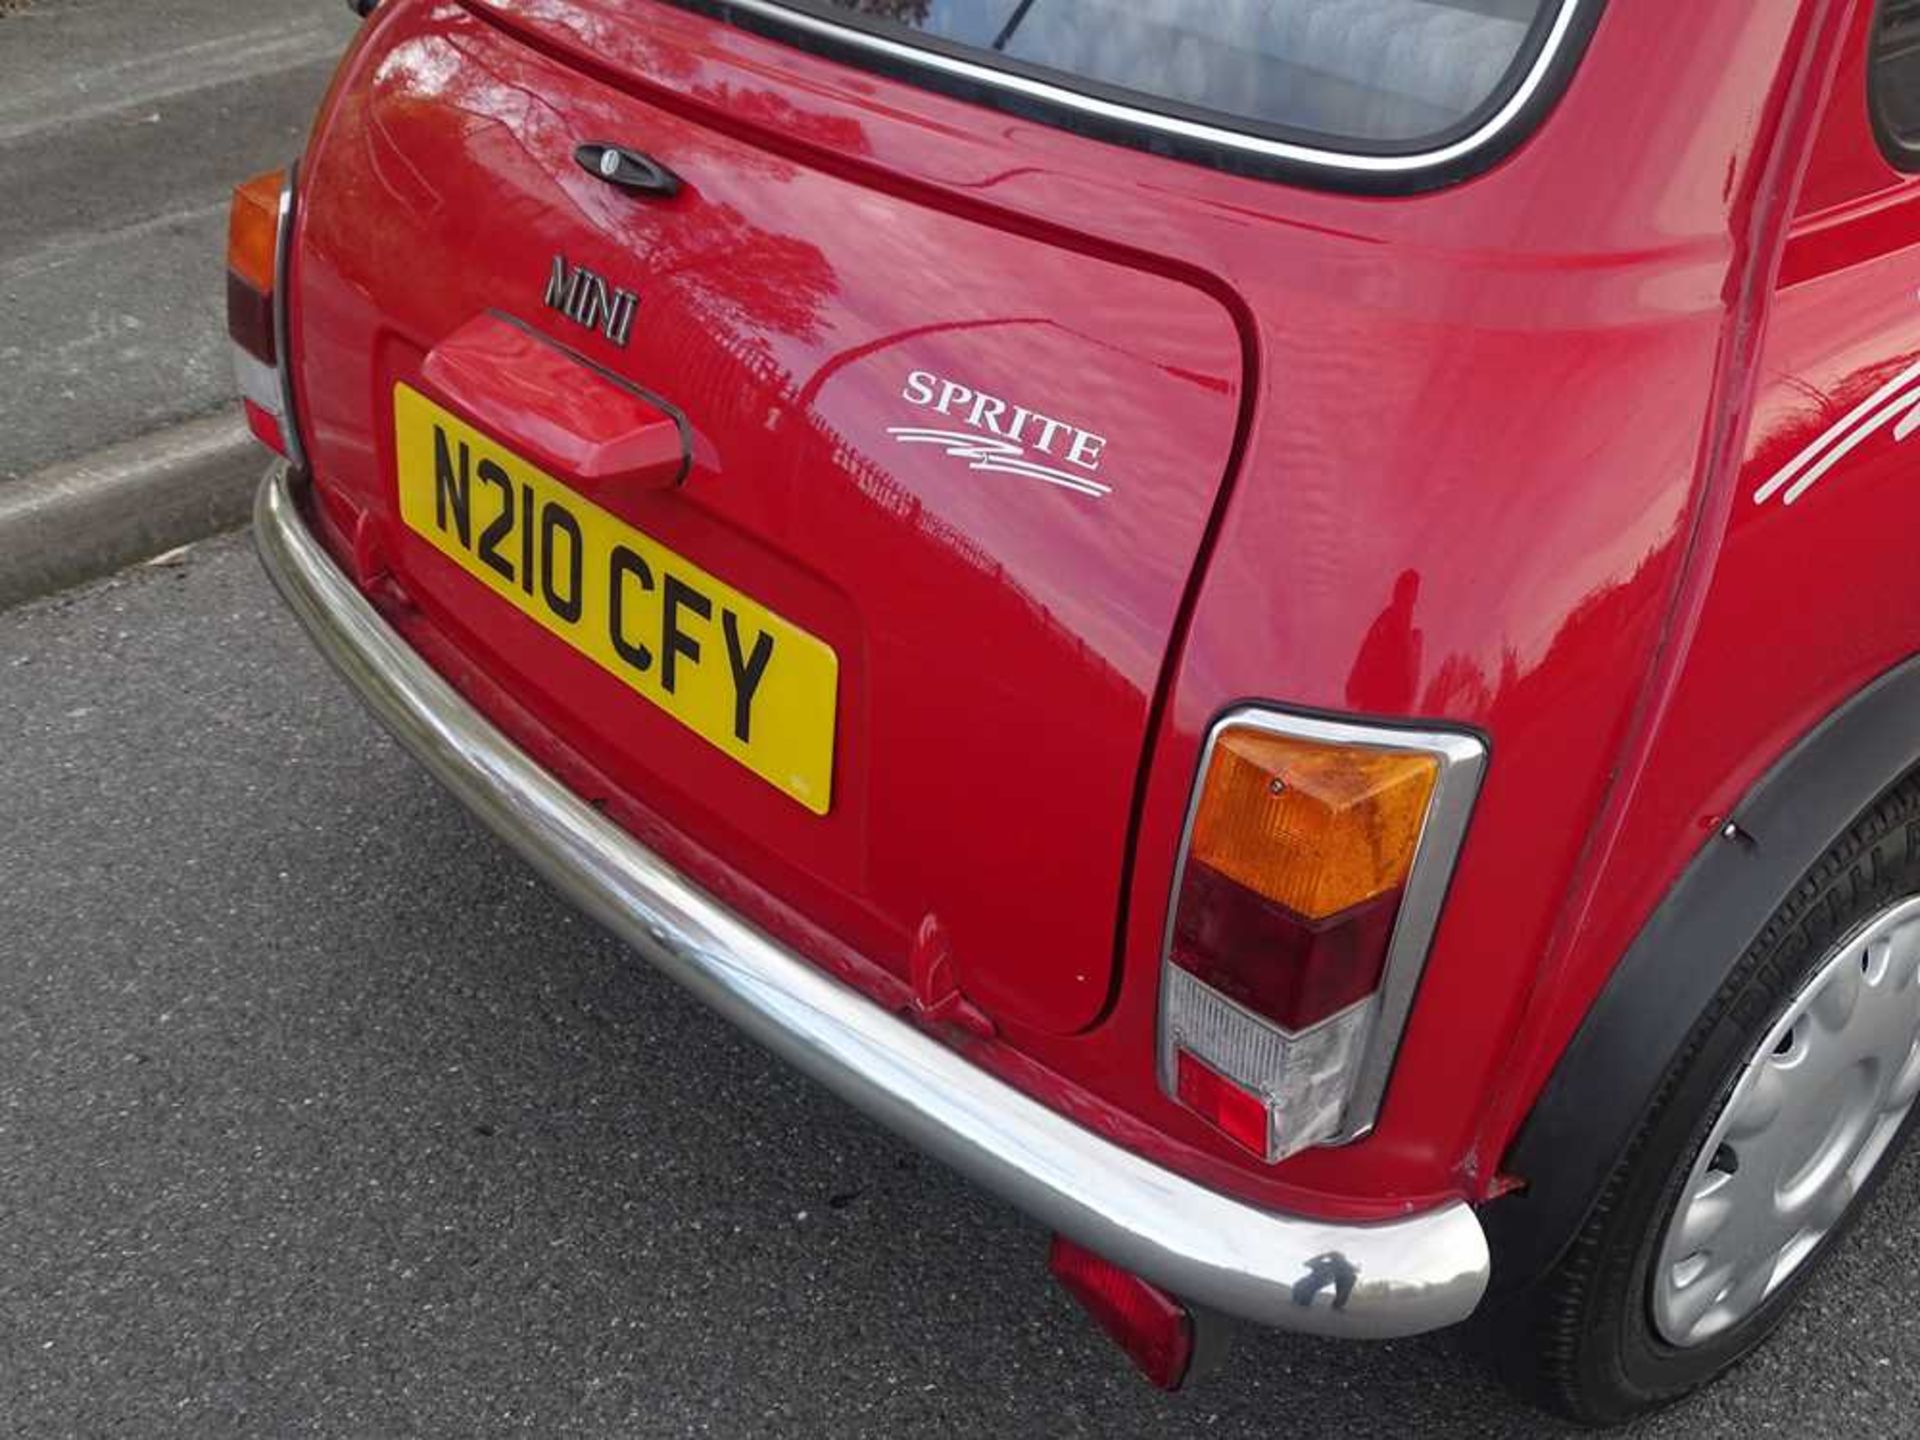 1995 Rover Mini Sprite Only c.22,500 miles from new - Image 23 of 52